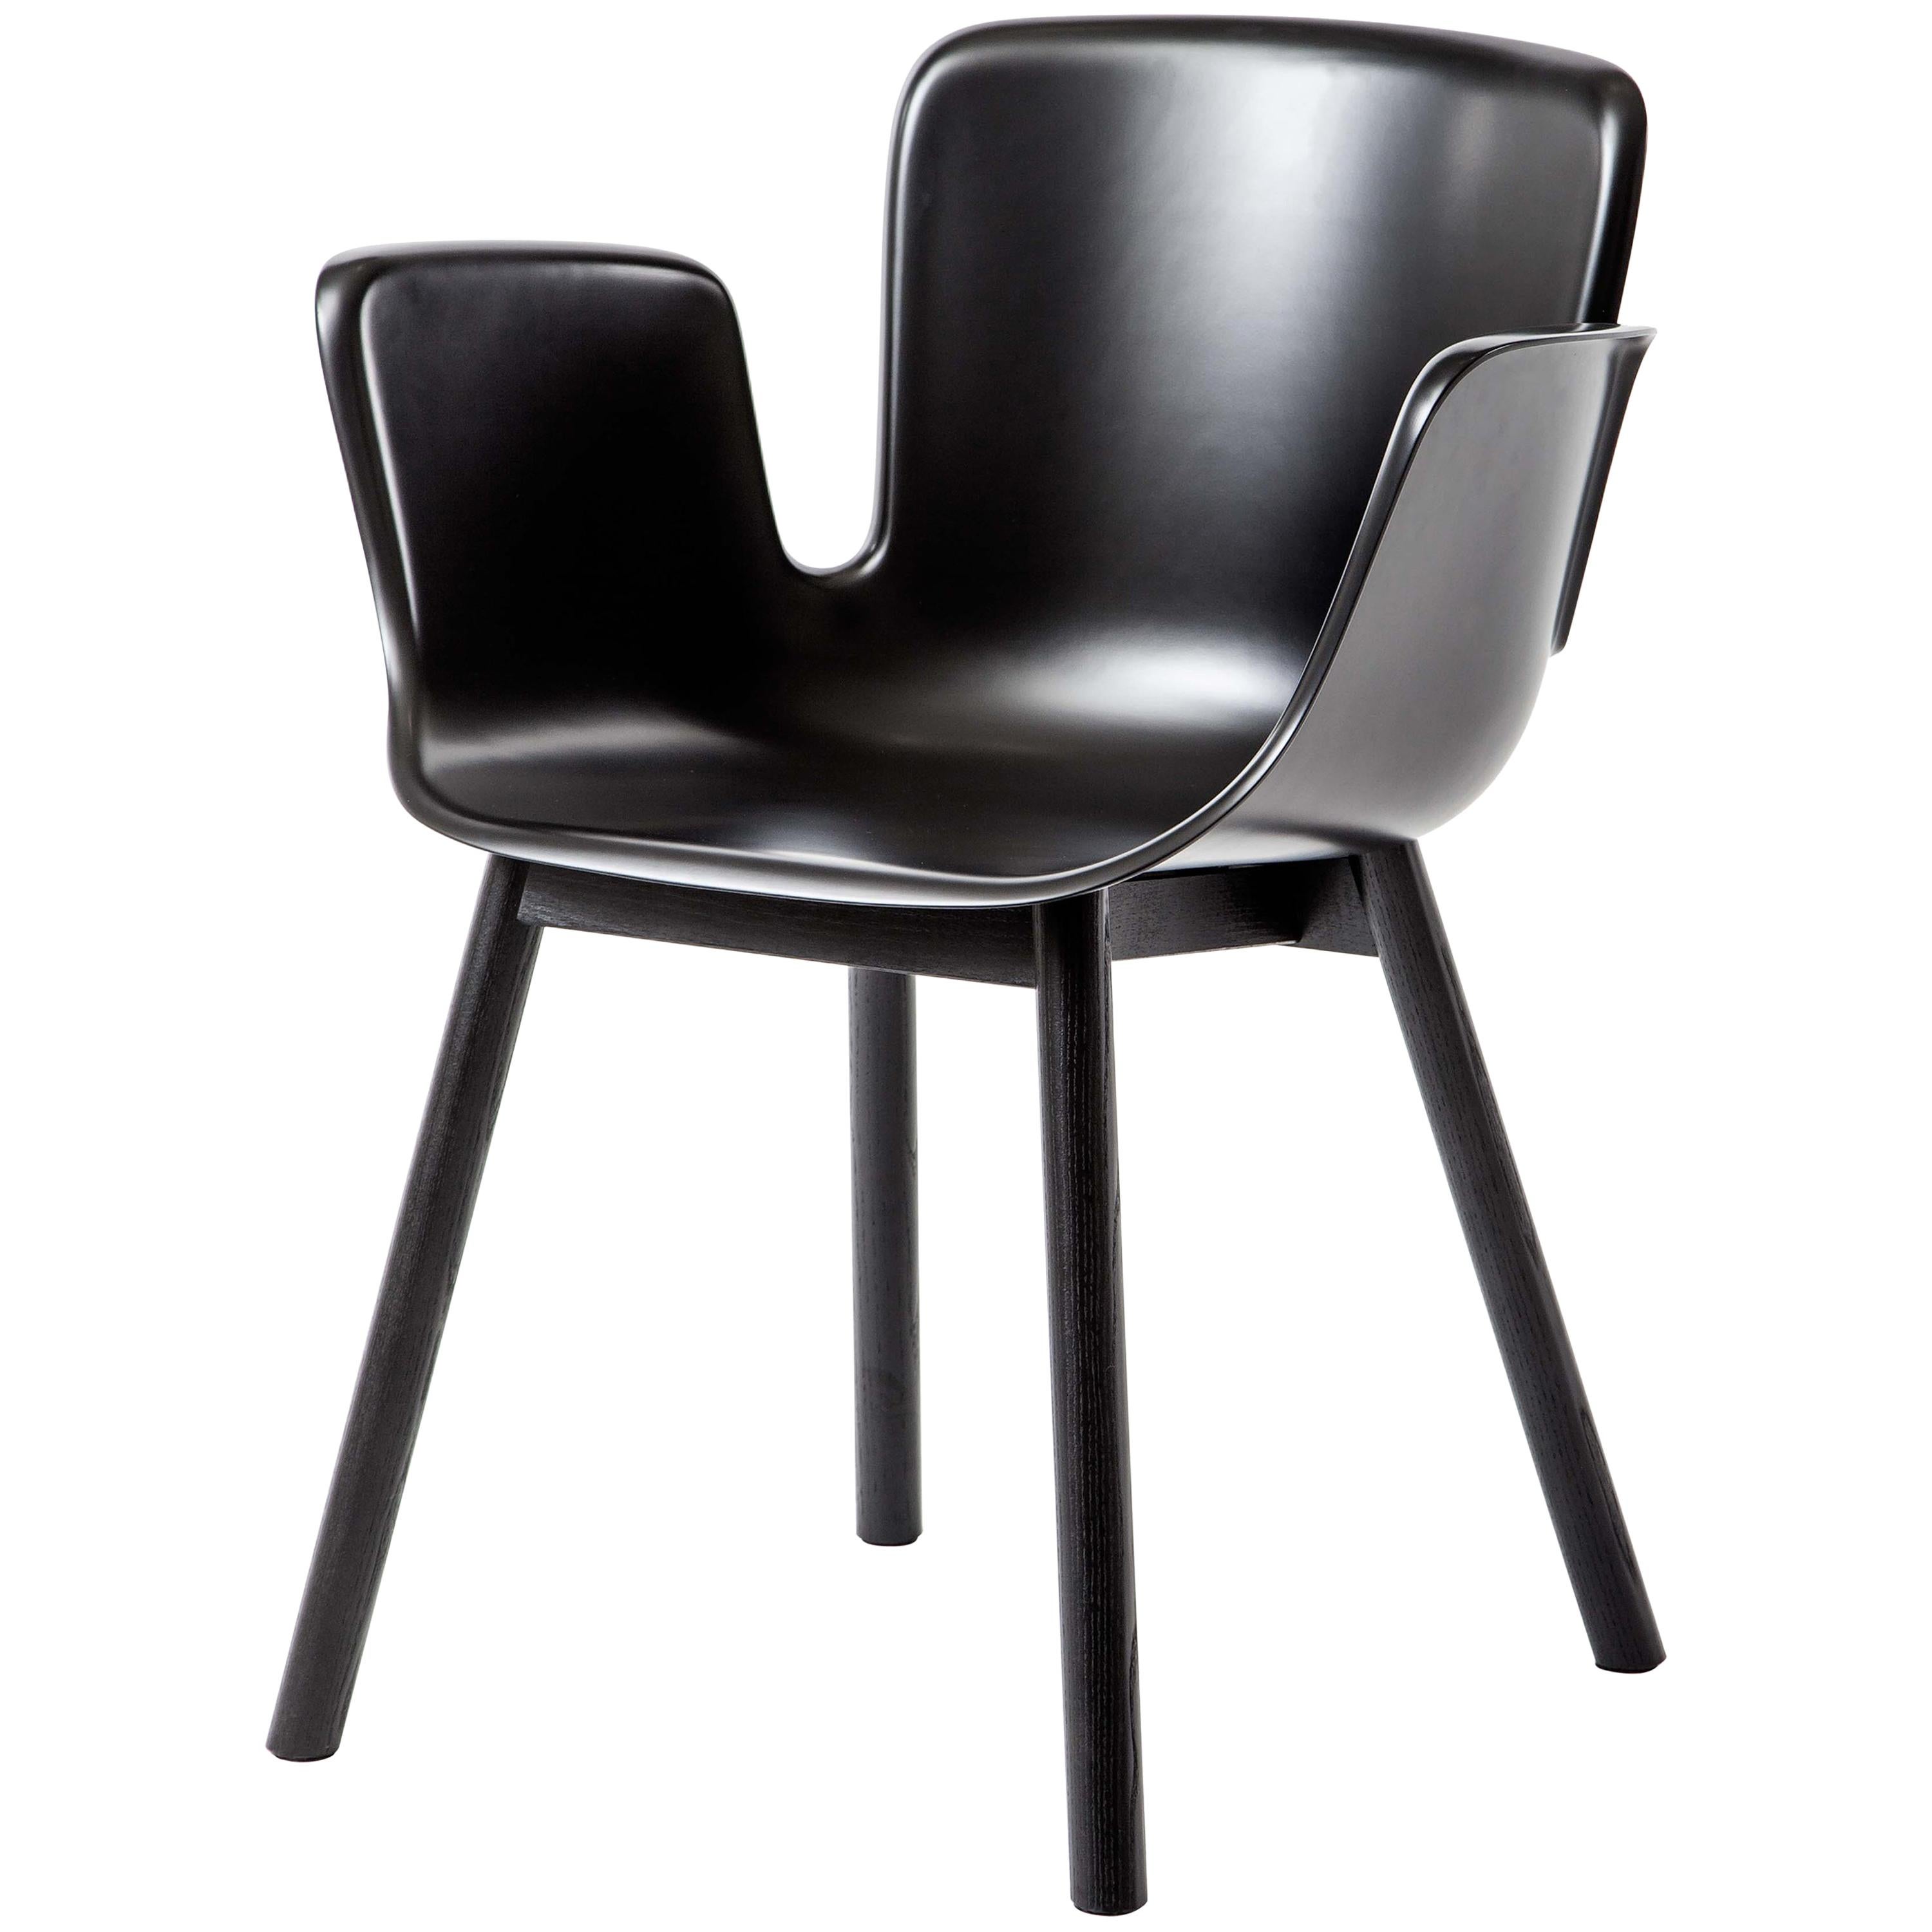 Werner Aisslinger Juli Plastic Chair with Graphite Black Seat by Cappellini